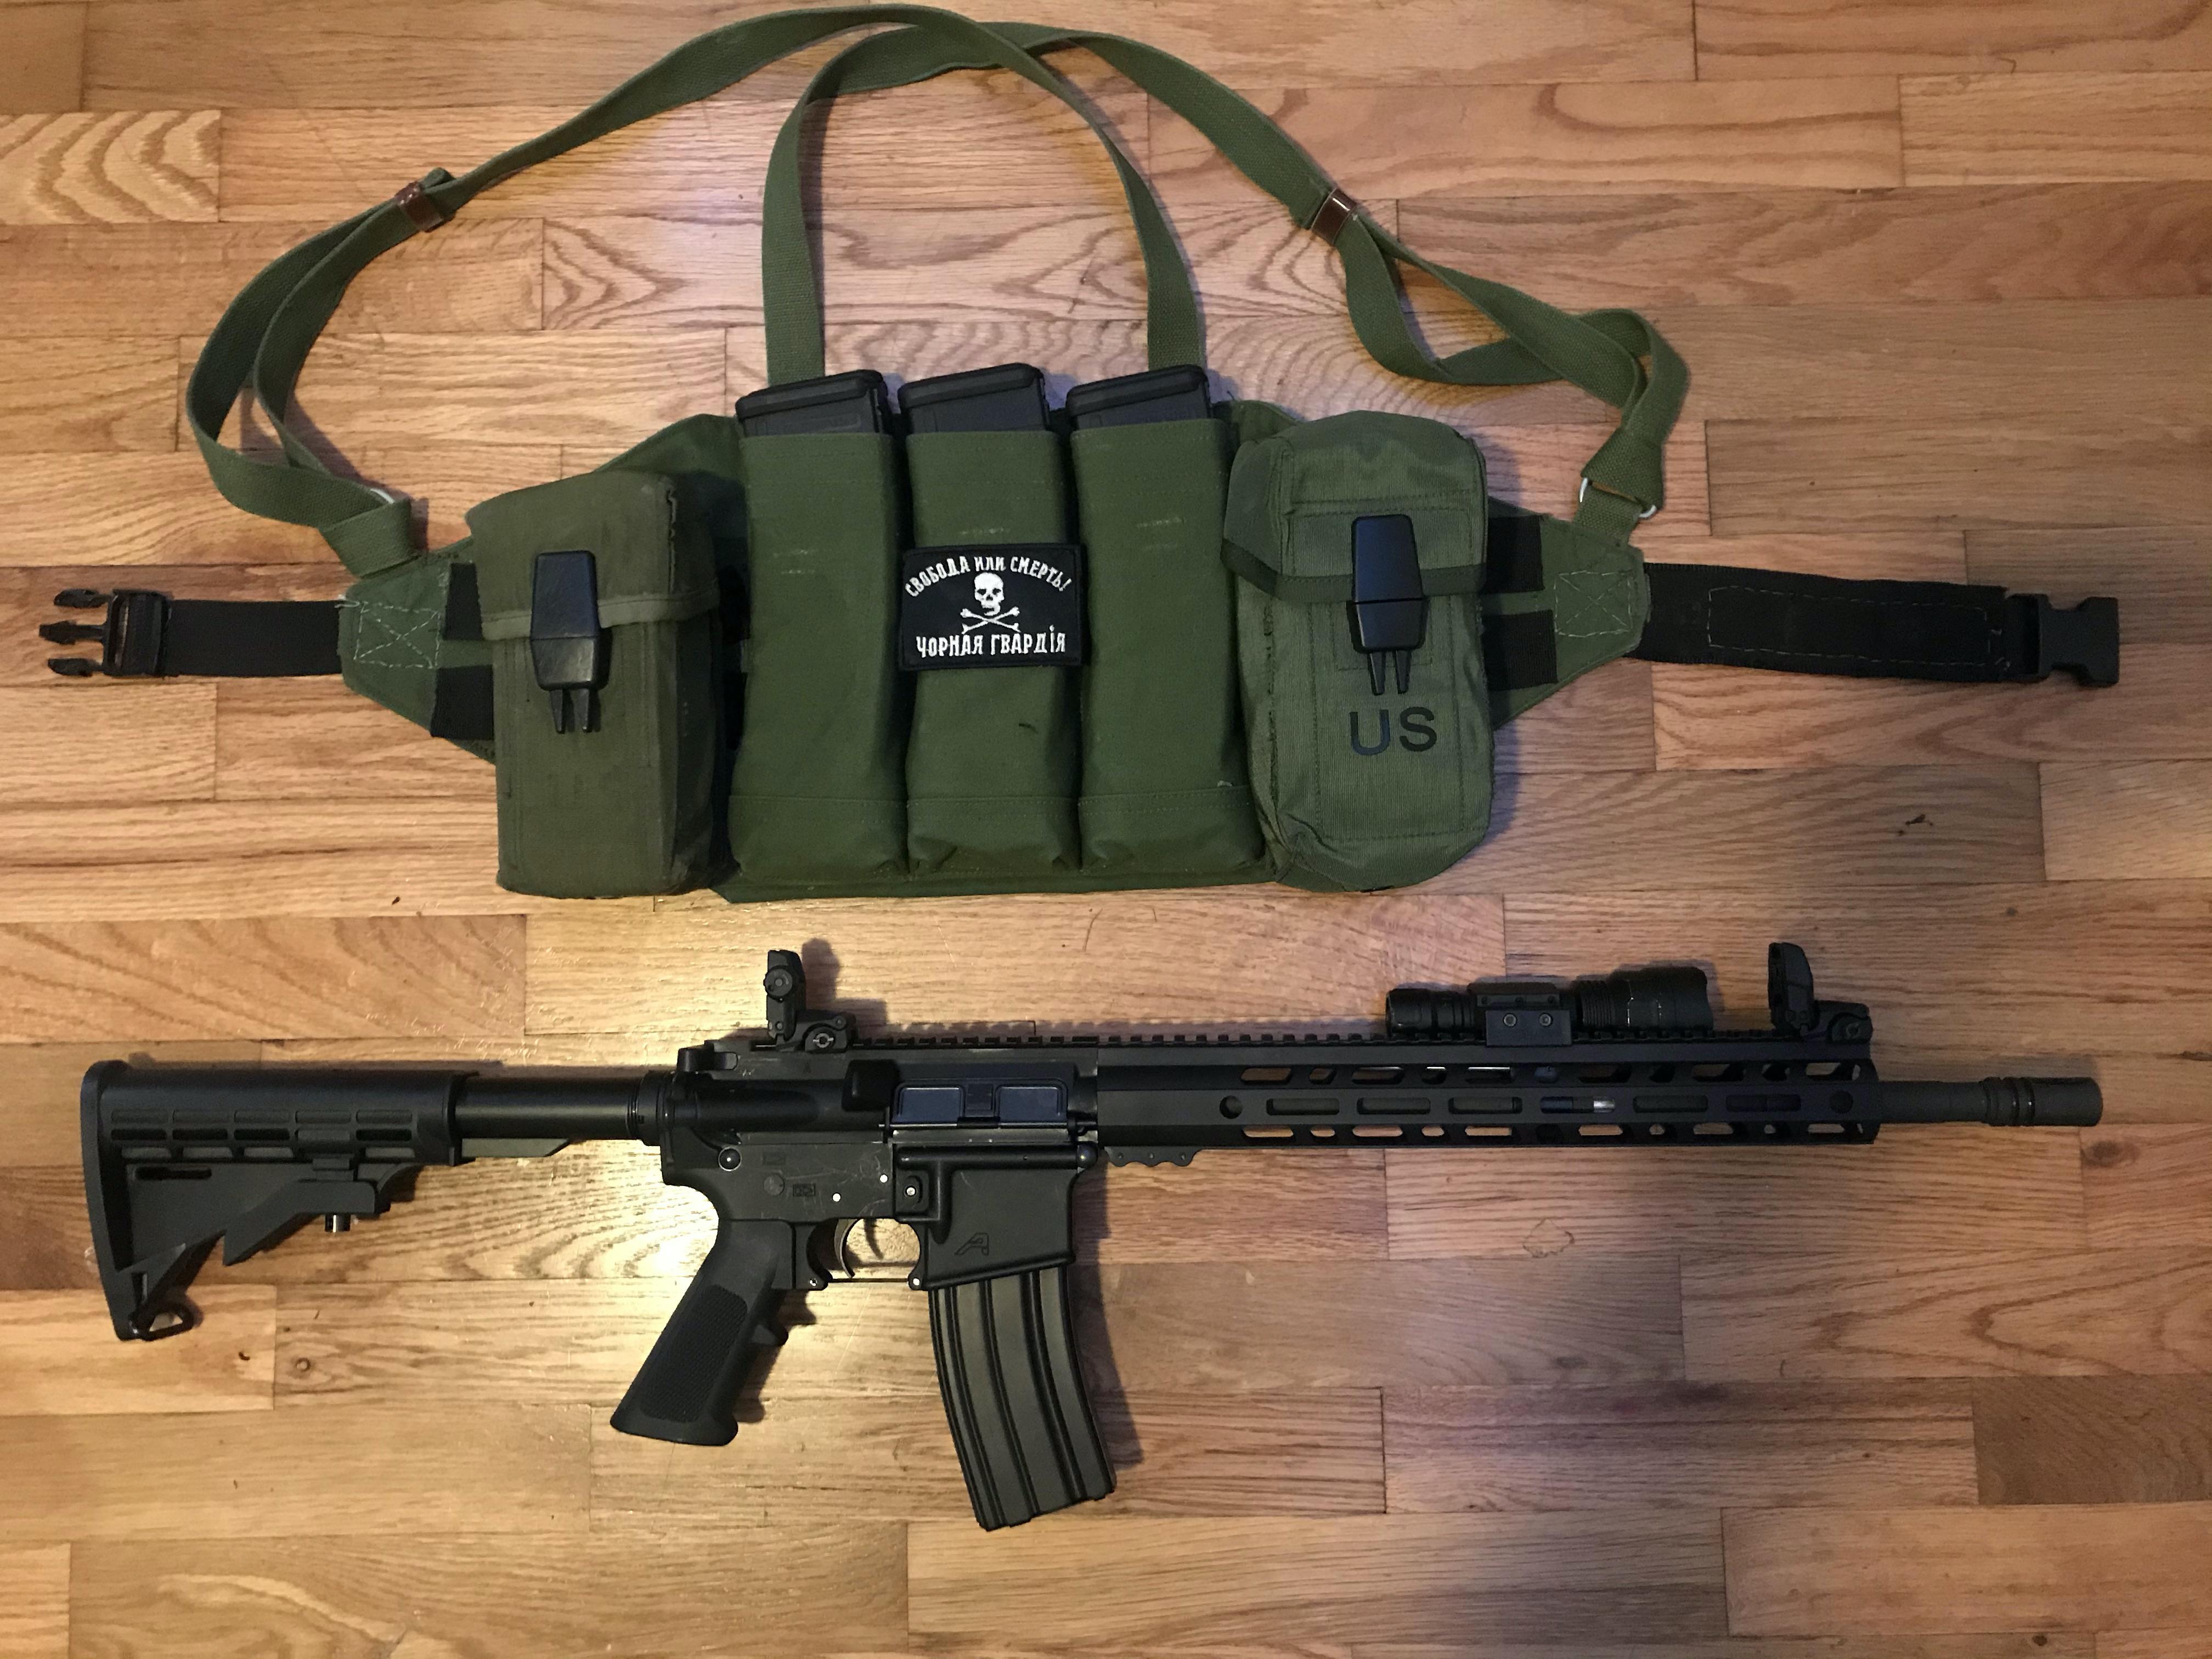 Budget AR build, with heavily modified type 56 chest rig | Scrolller